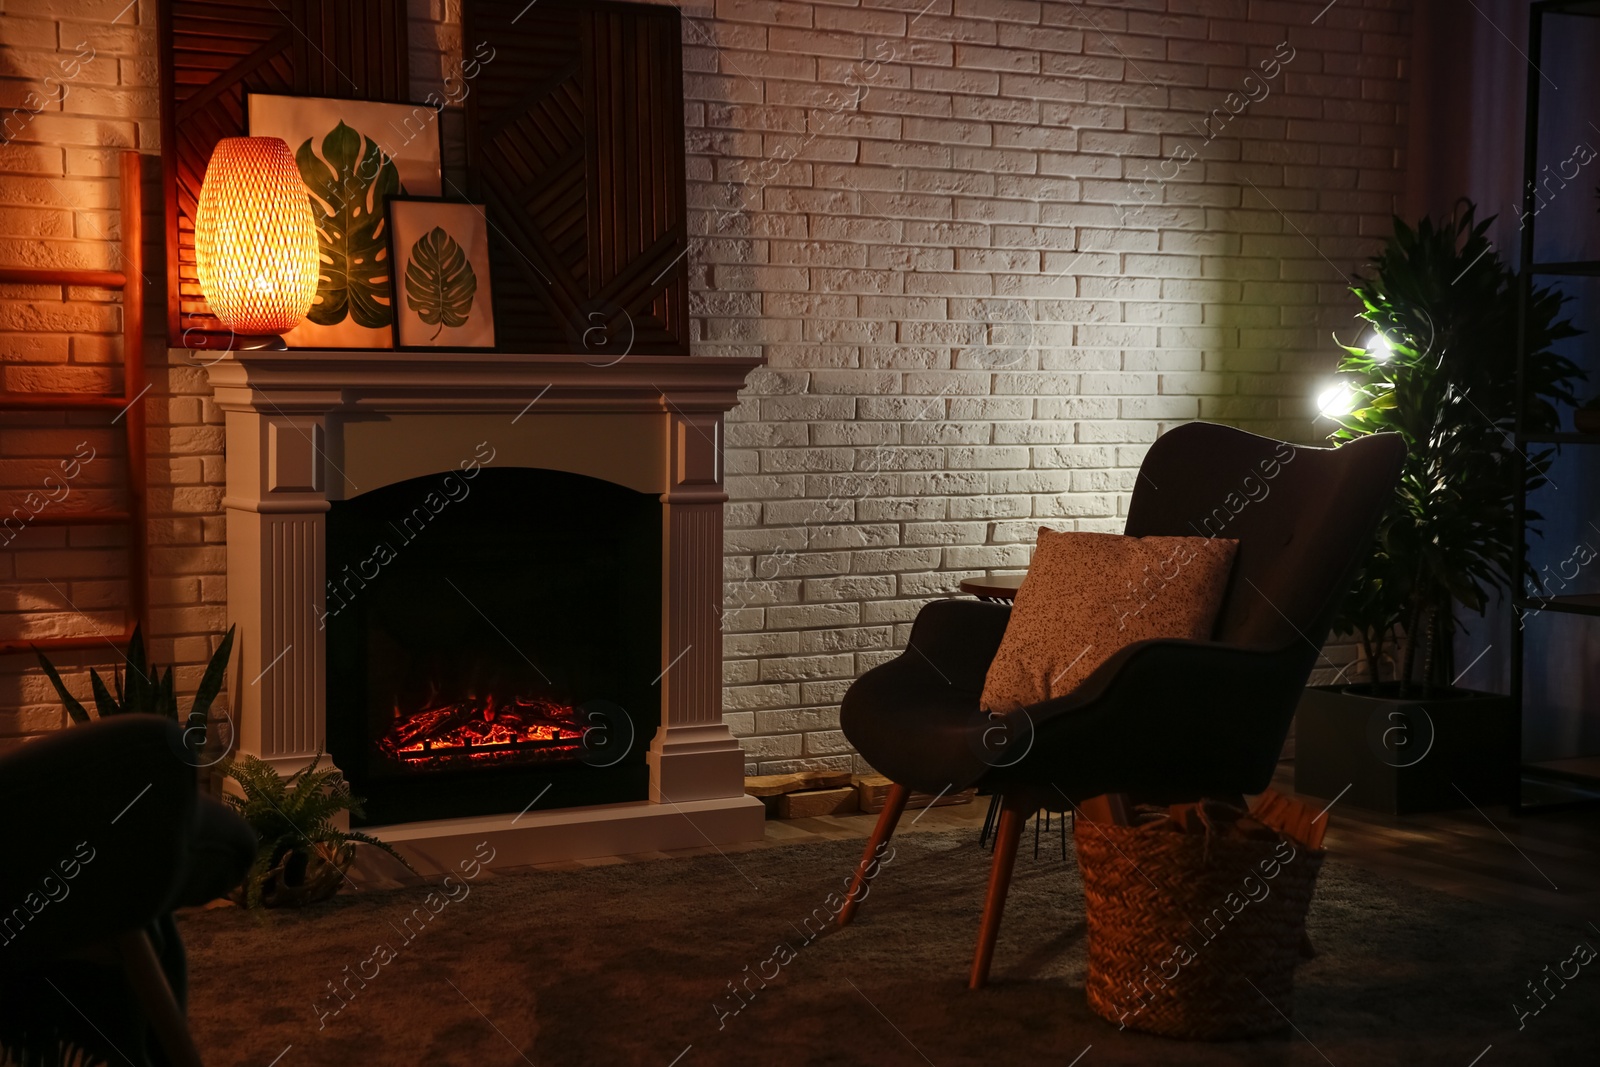 Photo of Living room interior with decorative fireplace near white brick wall